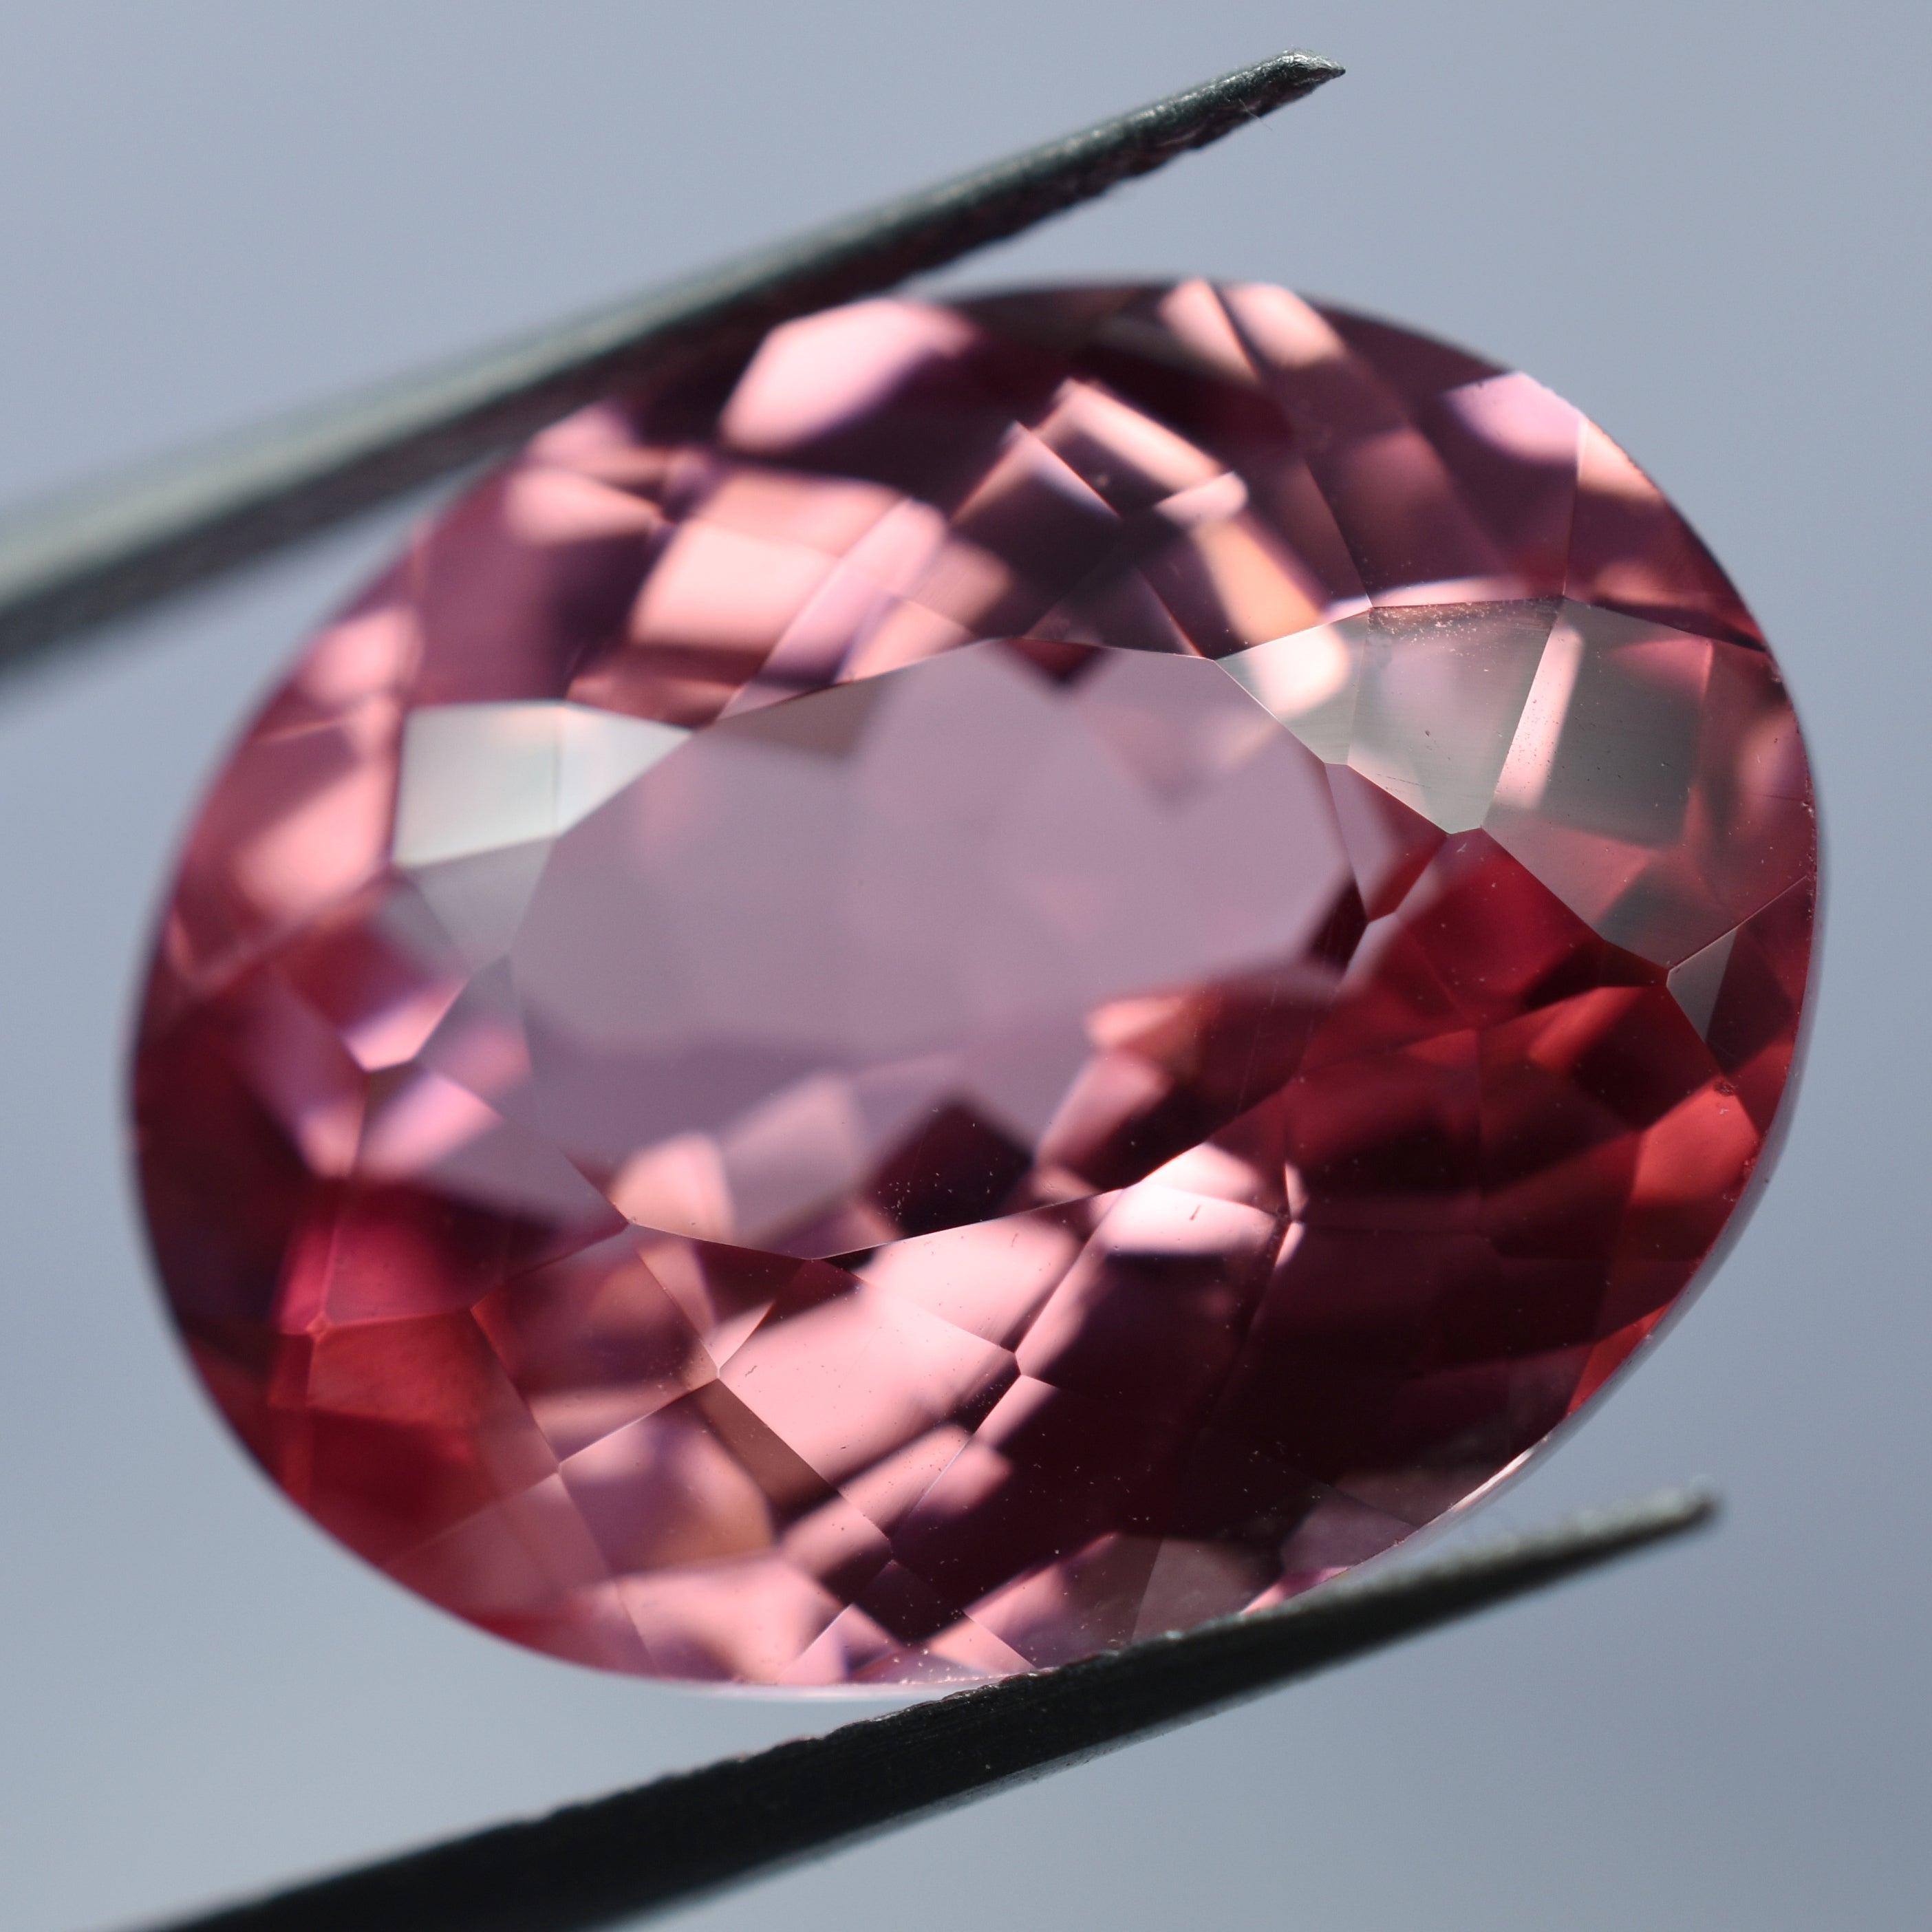 Oval Cut Sapphire Gem , Sapphire Necklace Glorious Gemstone For Jewelry Making 12.32 Carat Padparadscha Sapphire CERTIFIED Natural Oval Shape Loose Gemstone